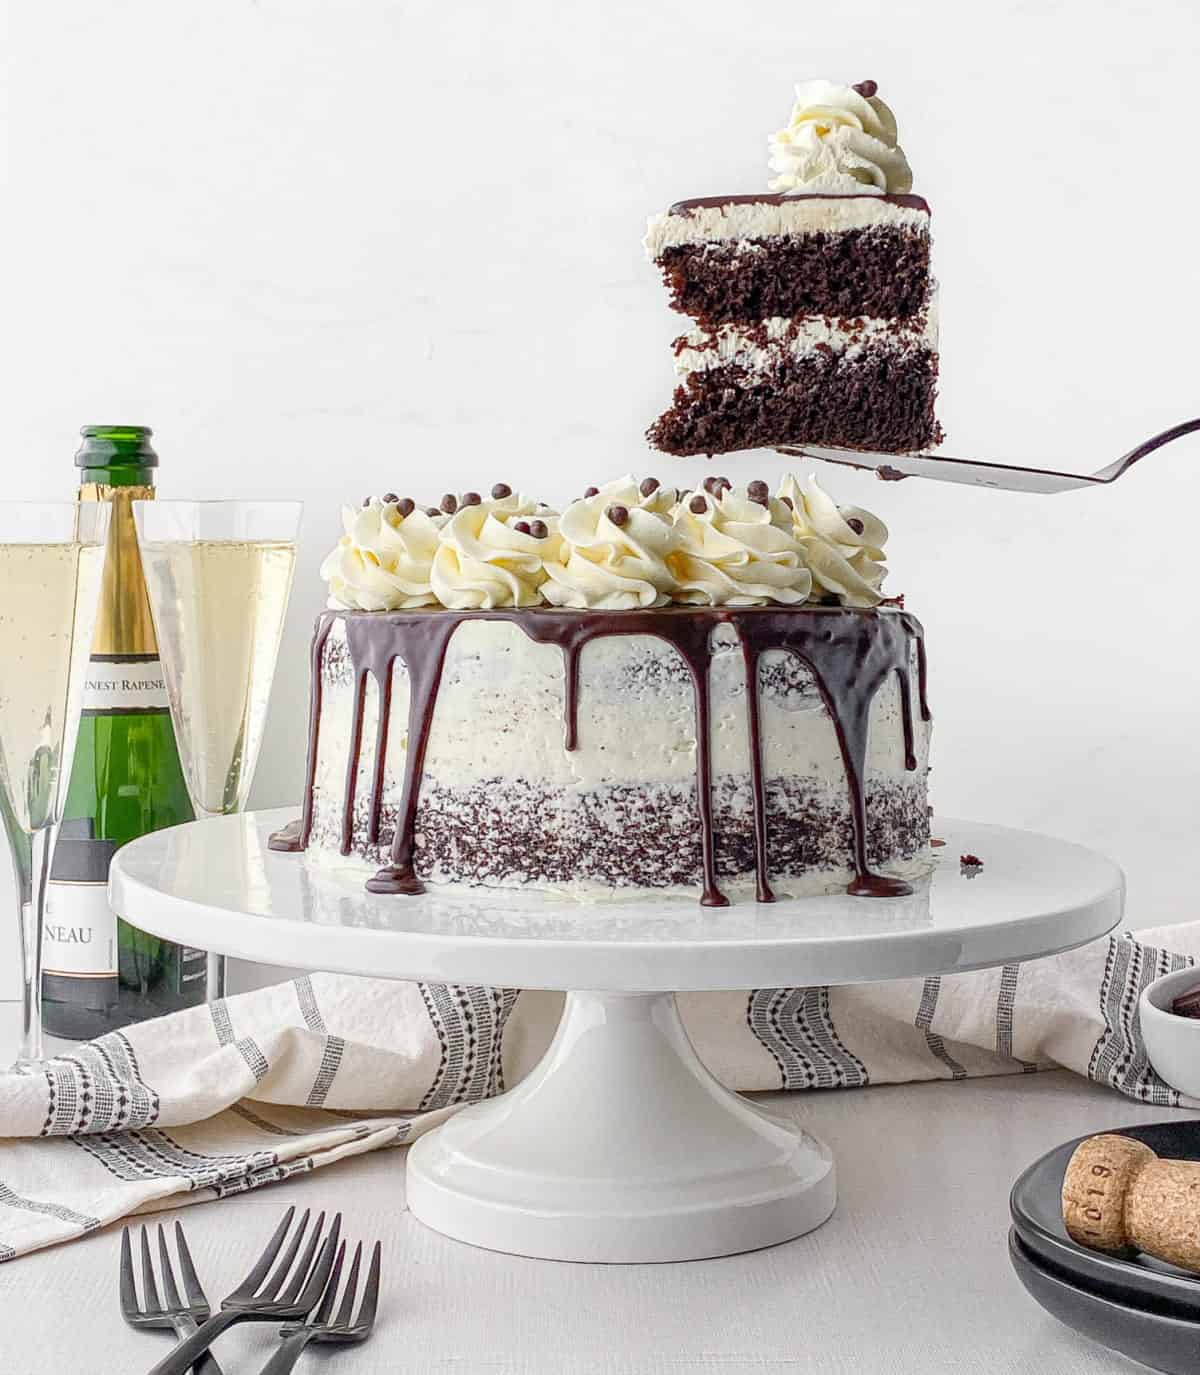 A slice of Chocolate Champagne Cake on a cake server next to the rest of the cake.